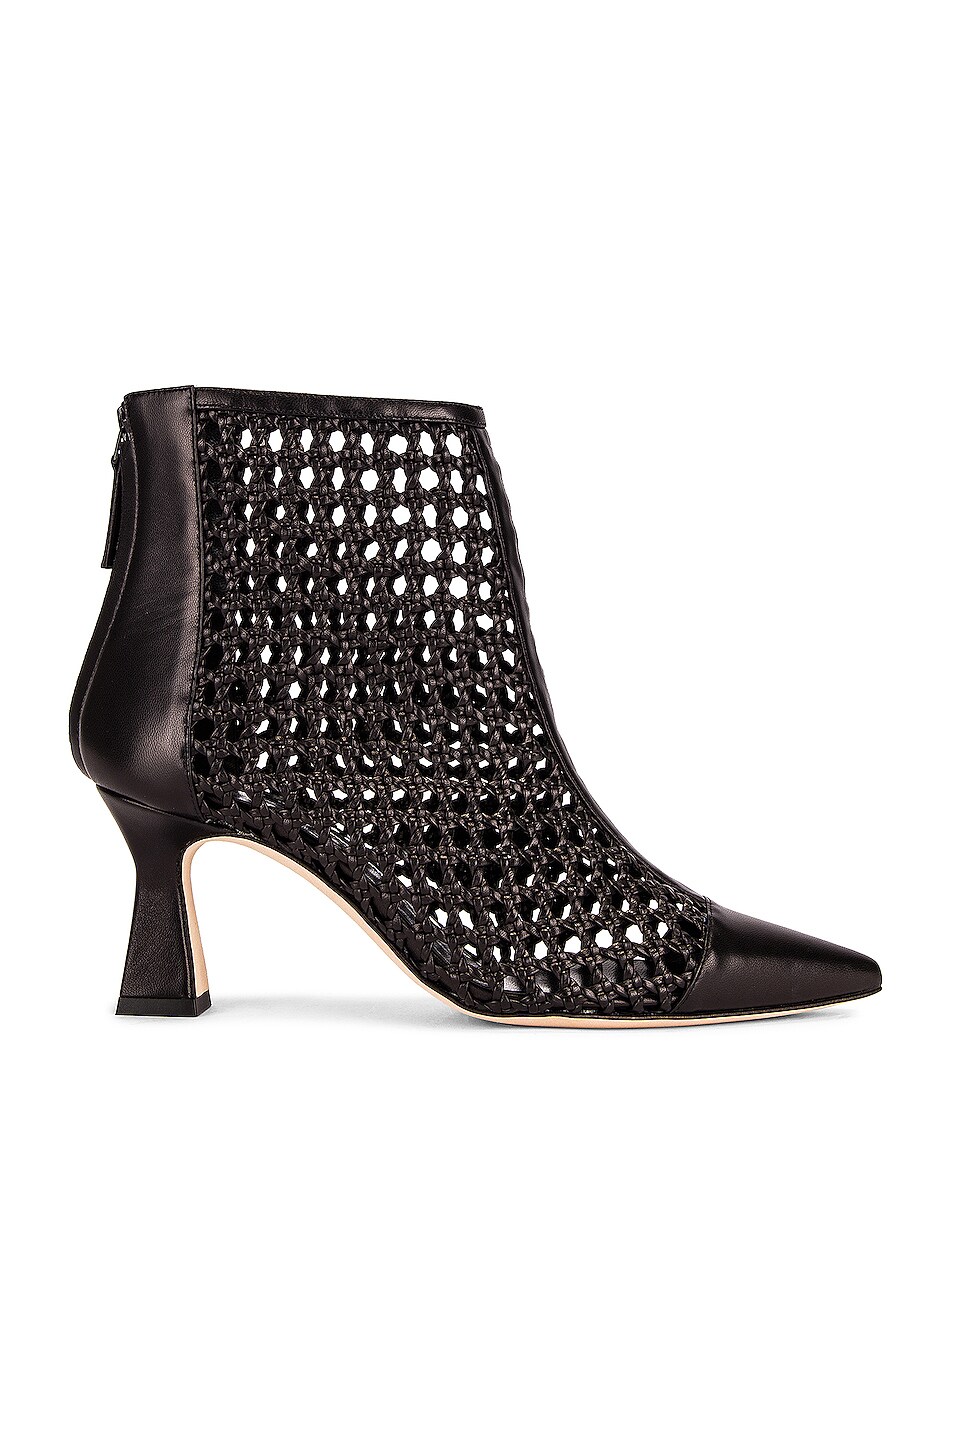 Image 1 of Manolo Blahnik Griego 70 Boot in Black